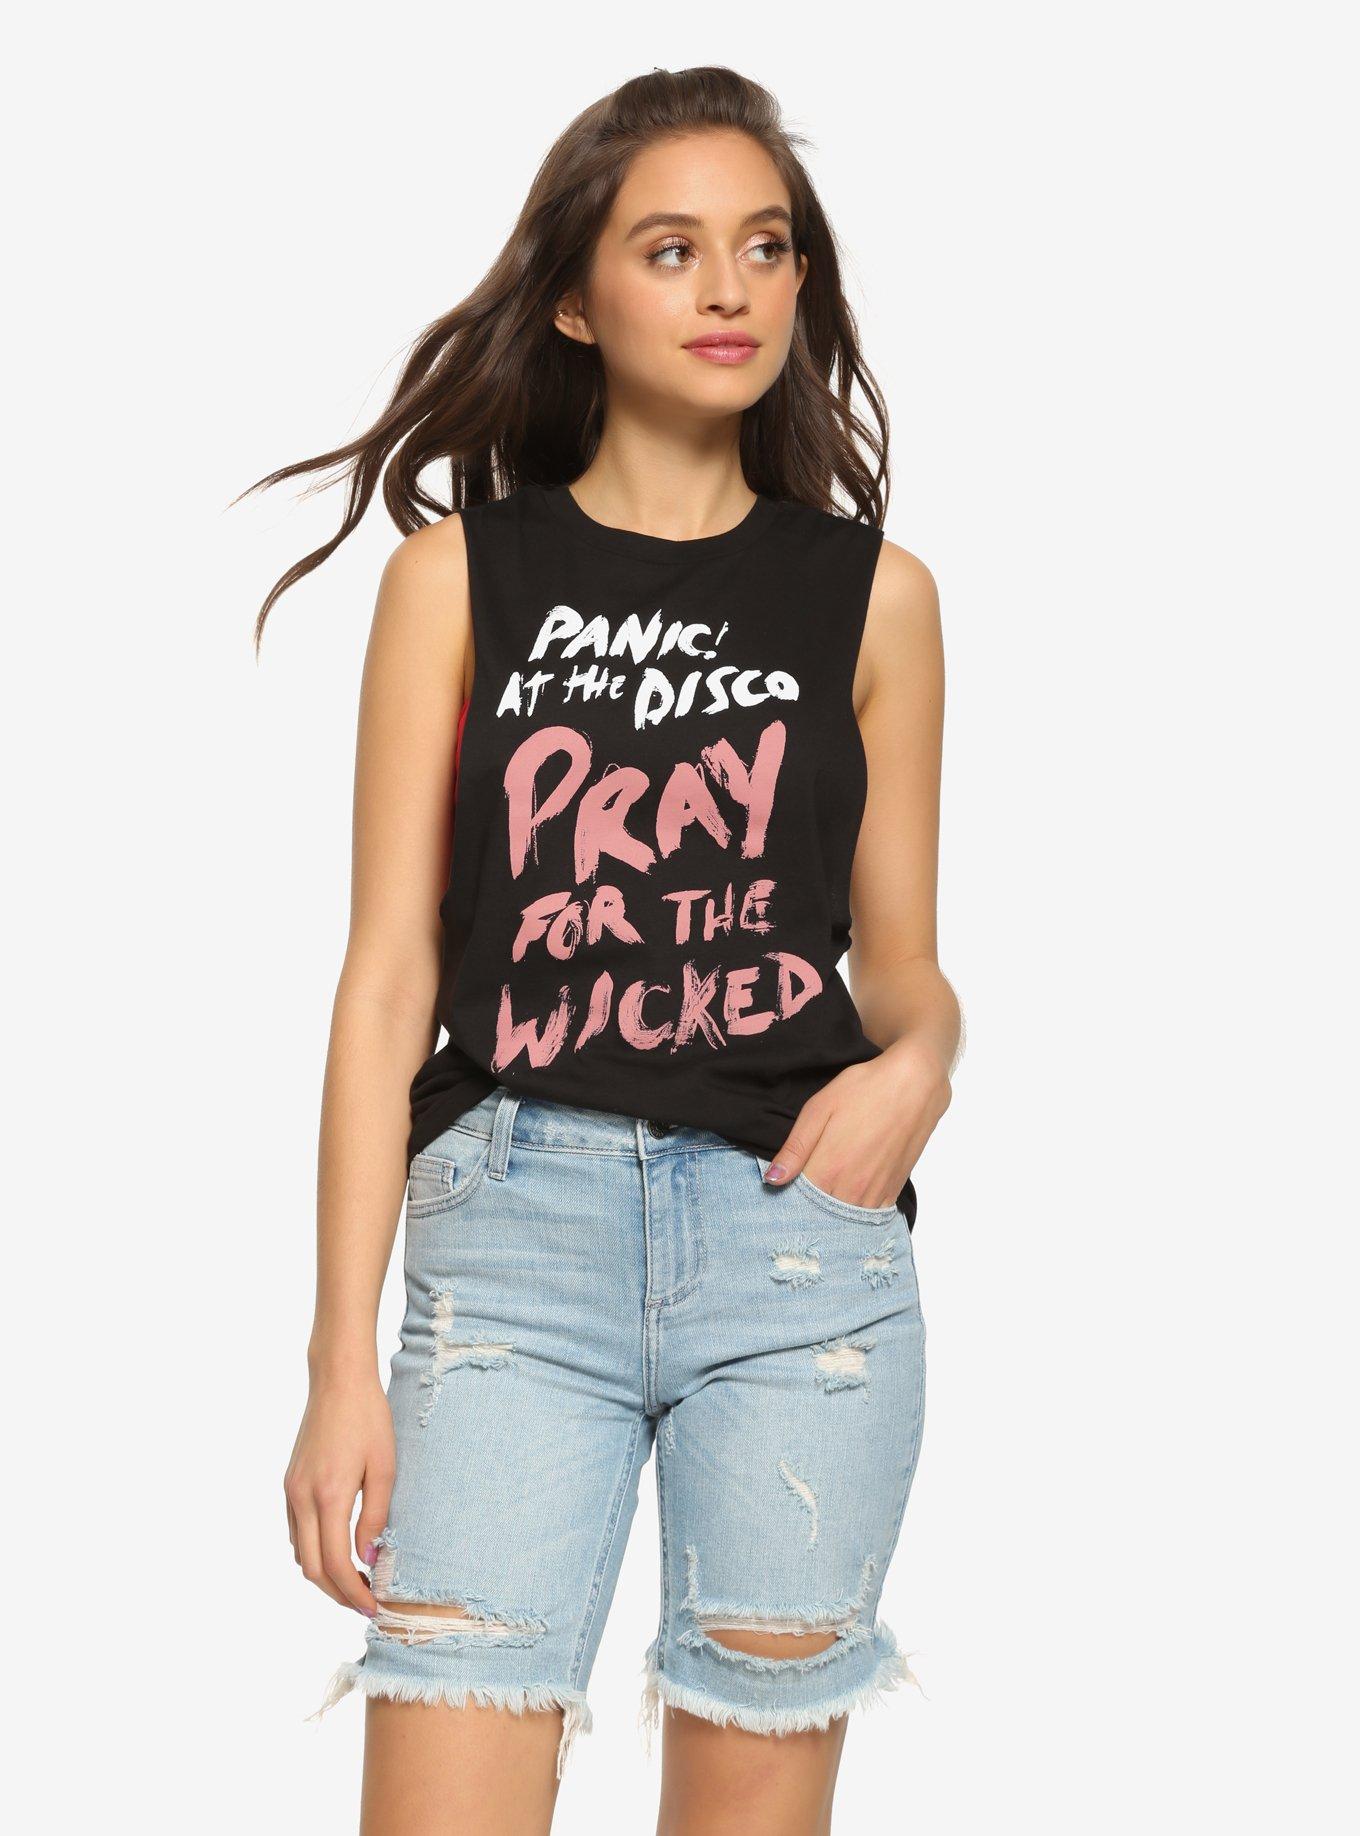 Panic! At The Disco Pray For The Wicked Girls Muscle Top, RED, hi-res